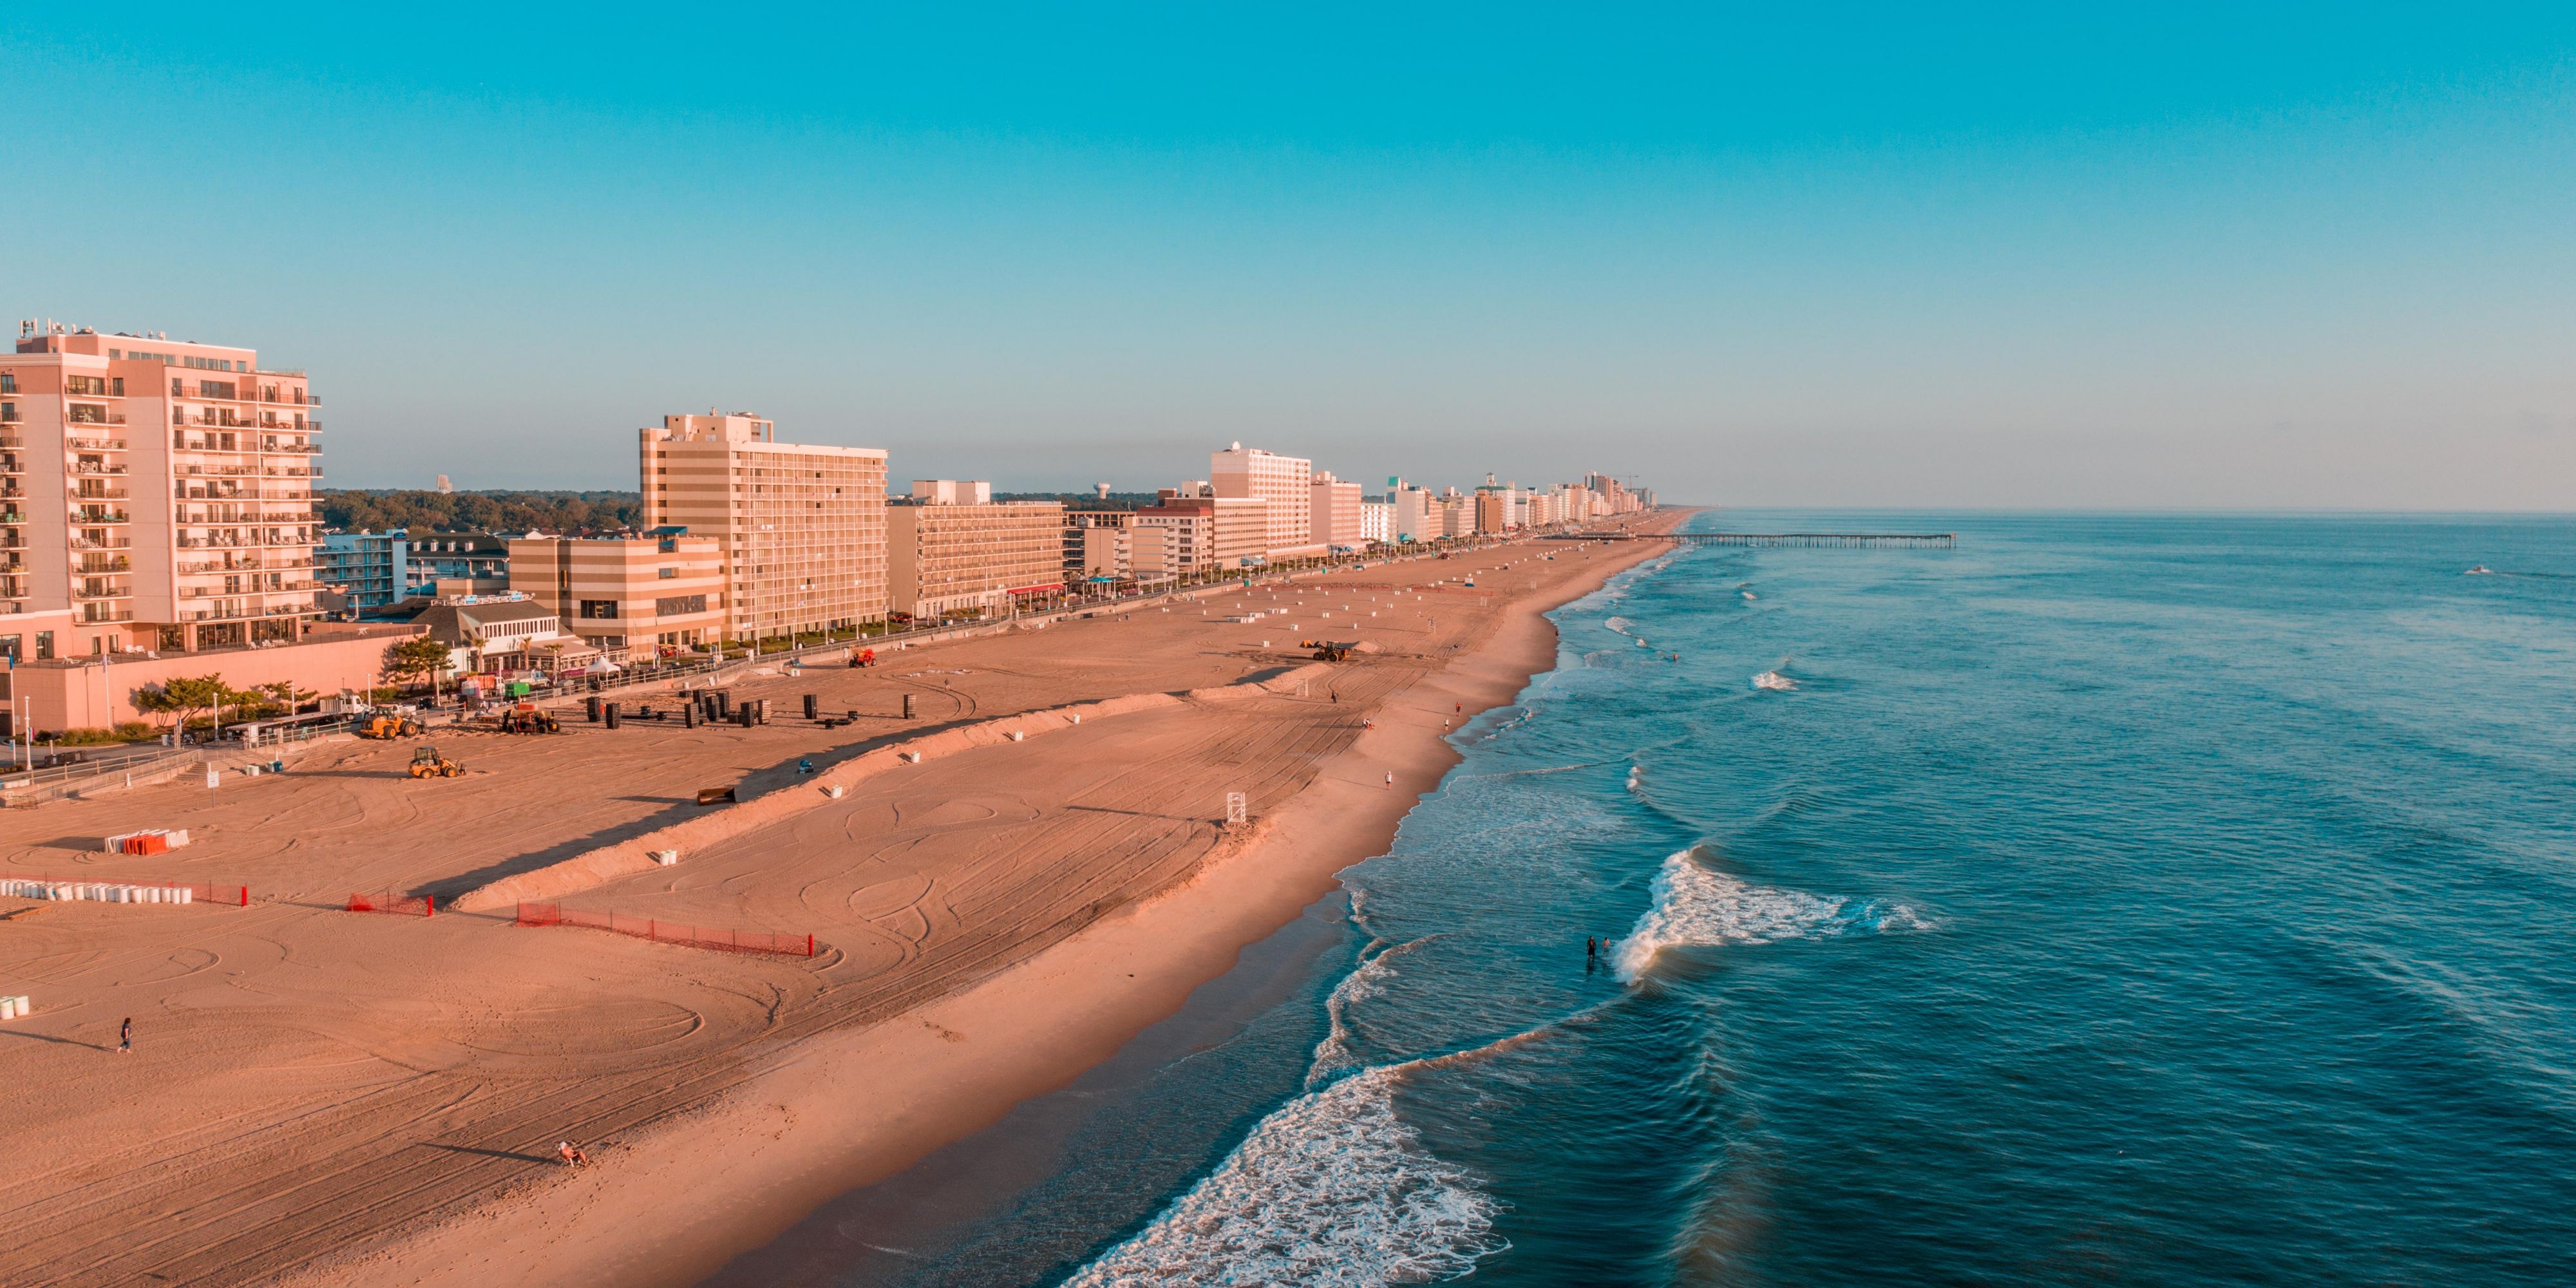 Head to Virginia Beach Oceanfront for a day filled with sand and sun- just a short drive from our hotel! Try the delicious freshly-caught seafood, or stop by our unique shops filled with hidden gems for you to take home.